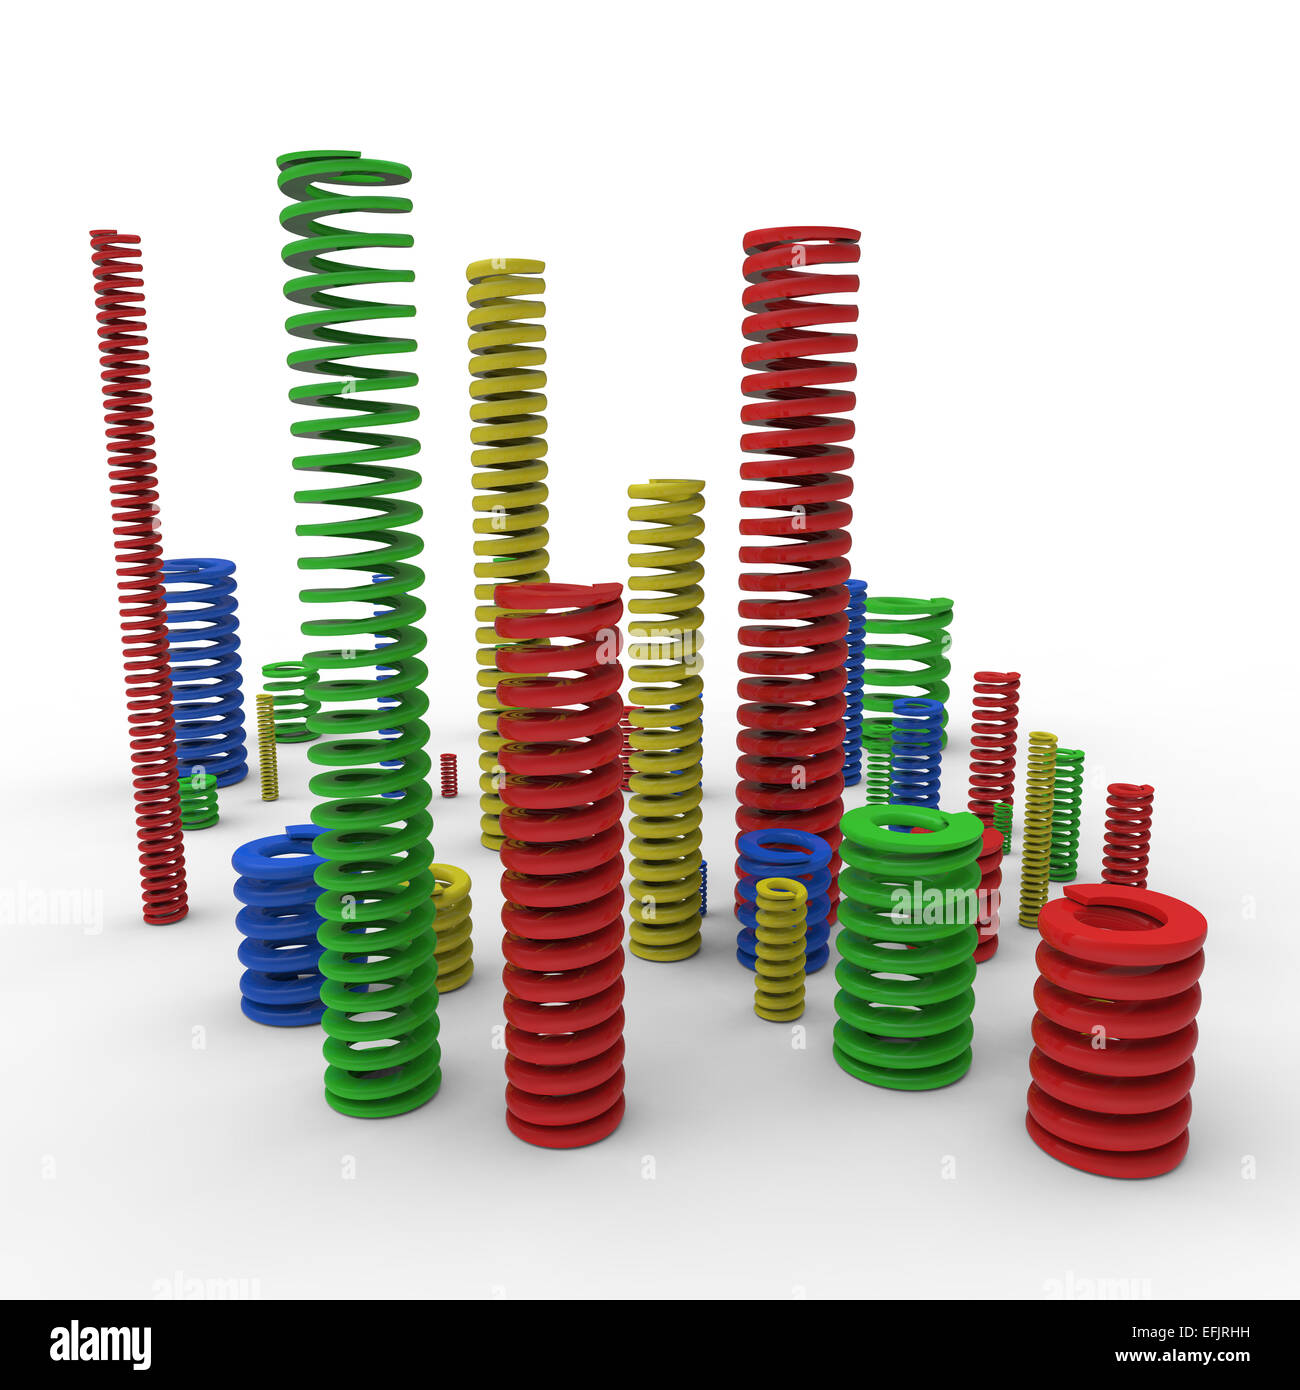 die compression springs with different colors and sizes to iso10243 on white background Stock Photo